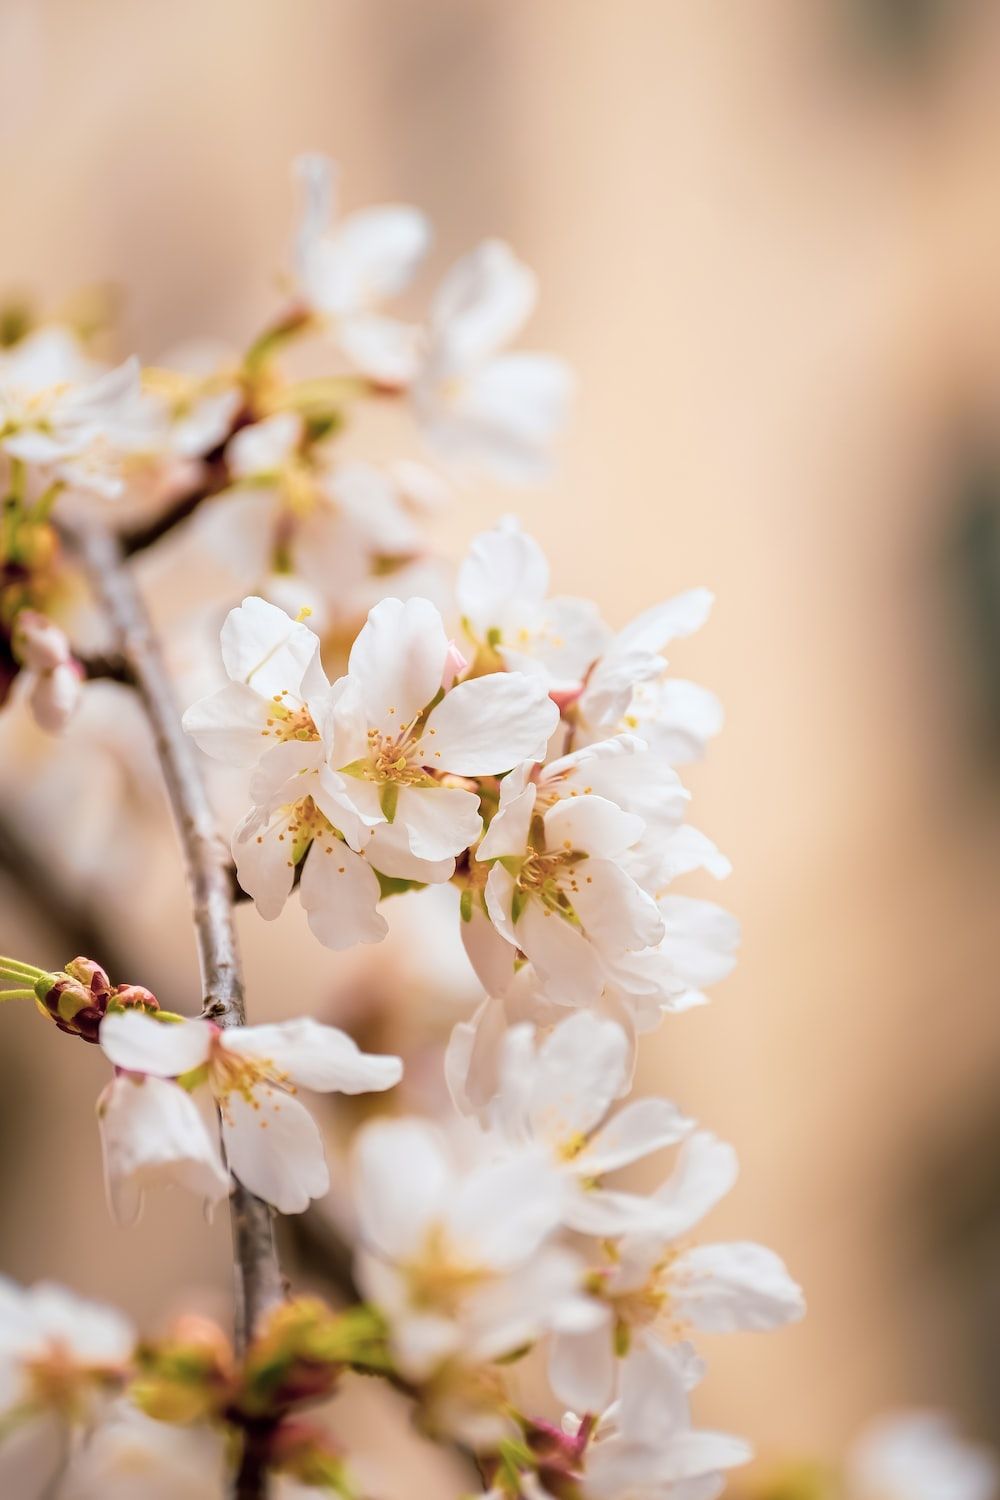 Spring Aesthetic Picture. Download Free Image